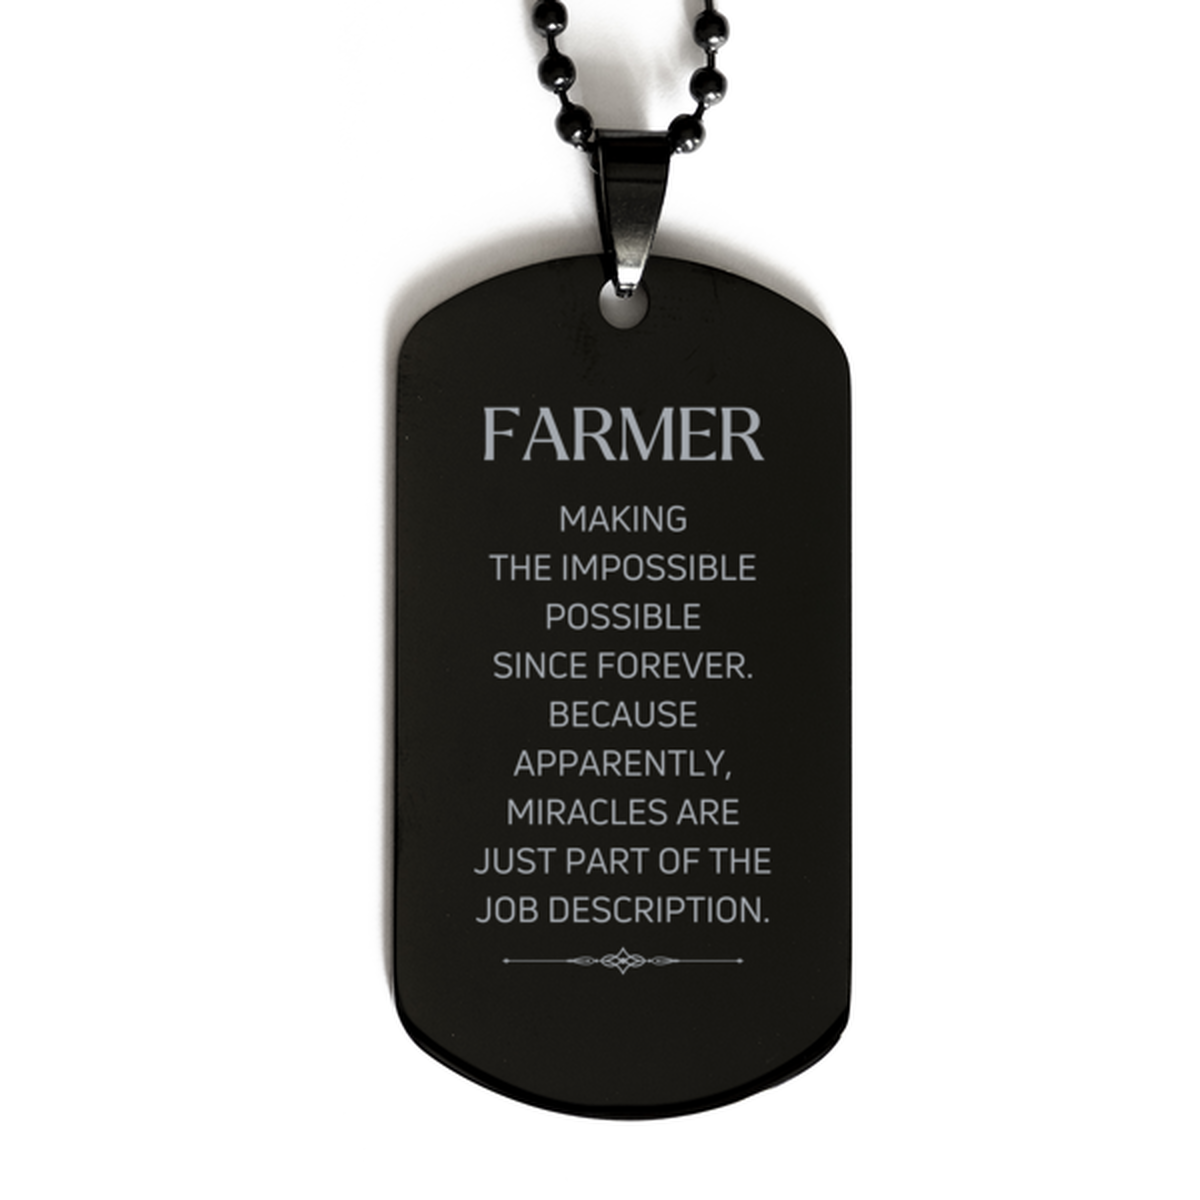 Funny Farmer Gifts, Miracles are just part of the job description, Inspirational Birthday Black Dog Tag For Farmer, Men, Women, Coworkers, Friends, Boss